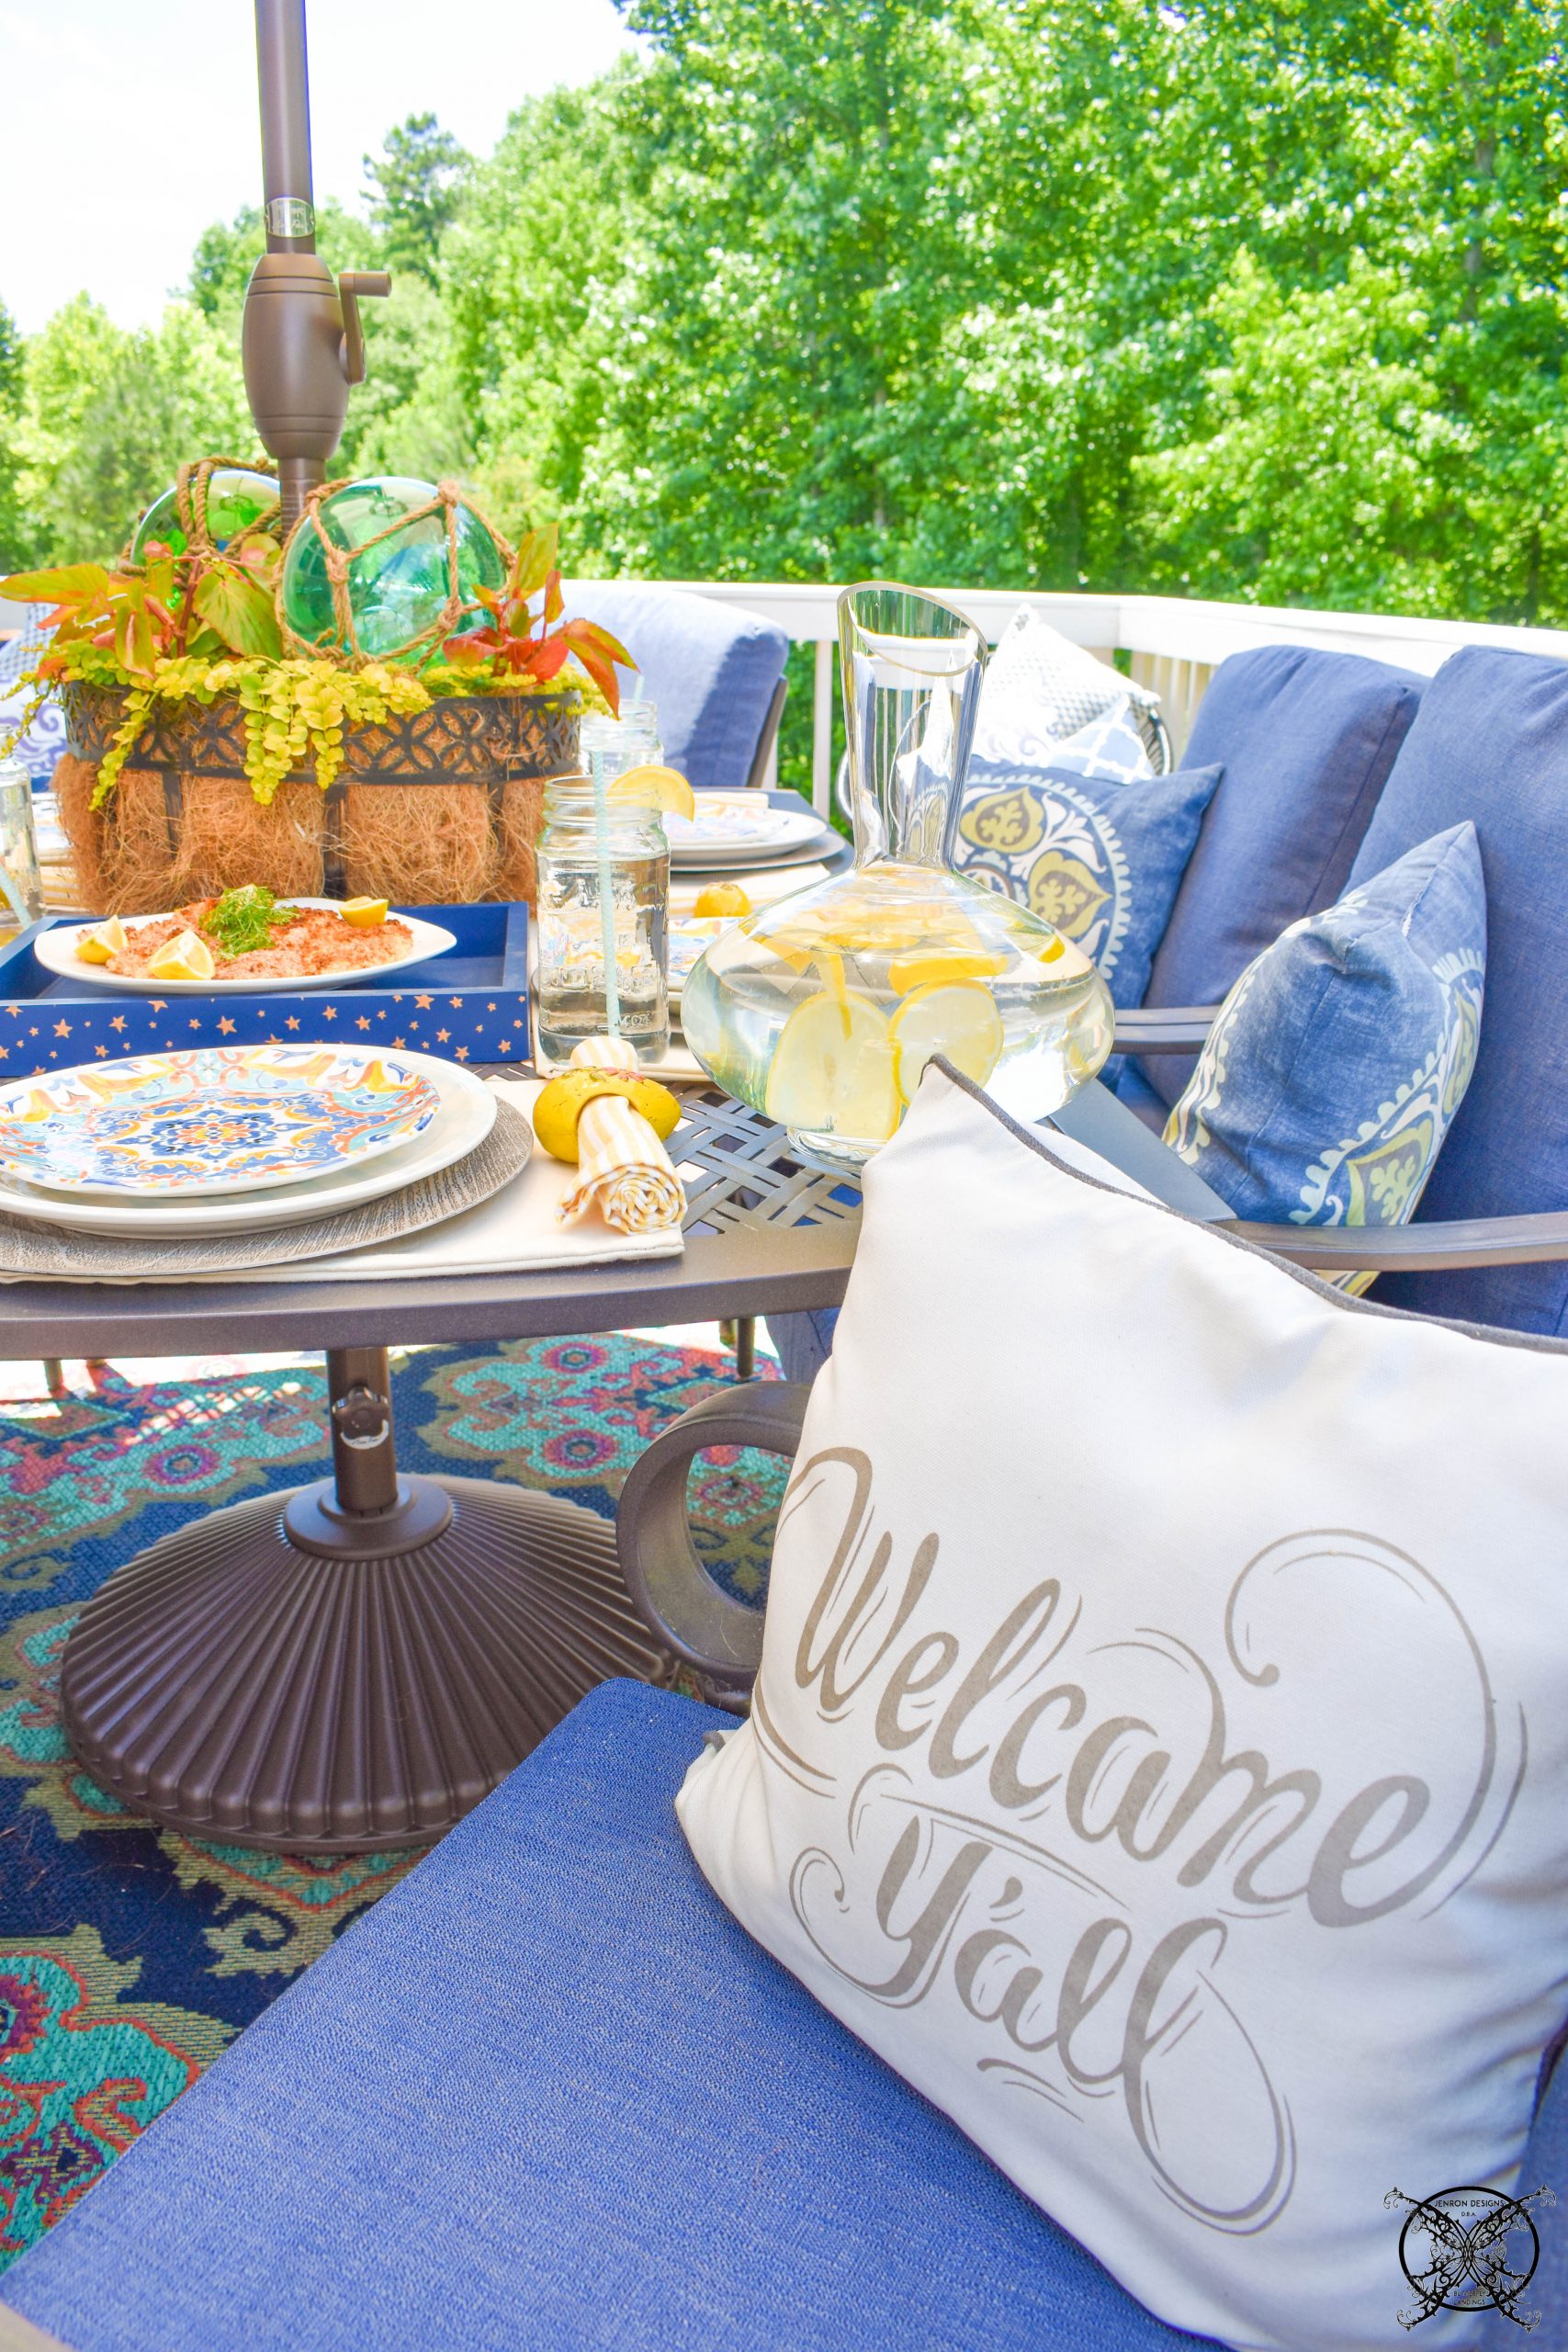 Welcome to Summertime on the Patio JENRON DESIGNS